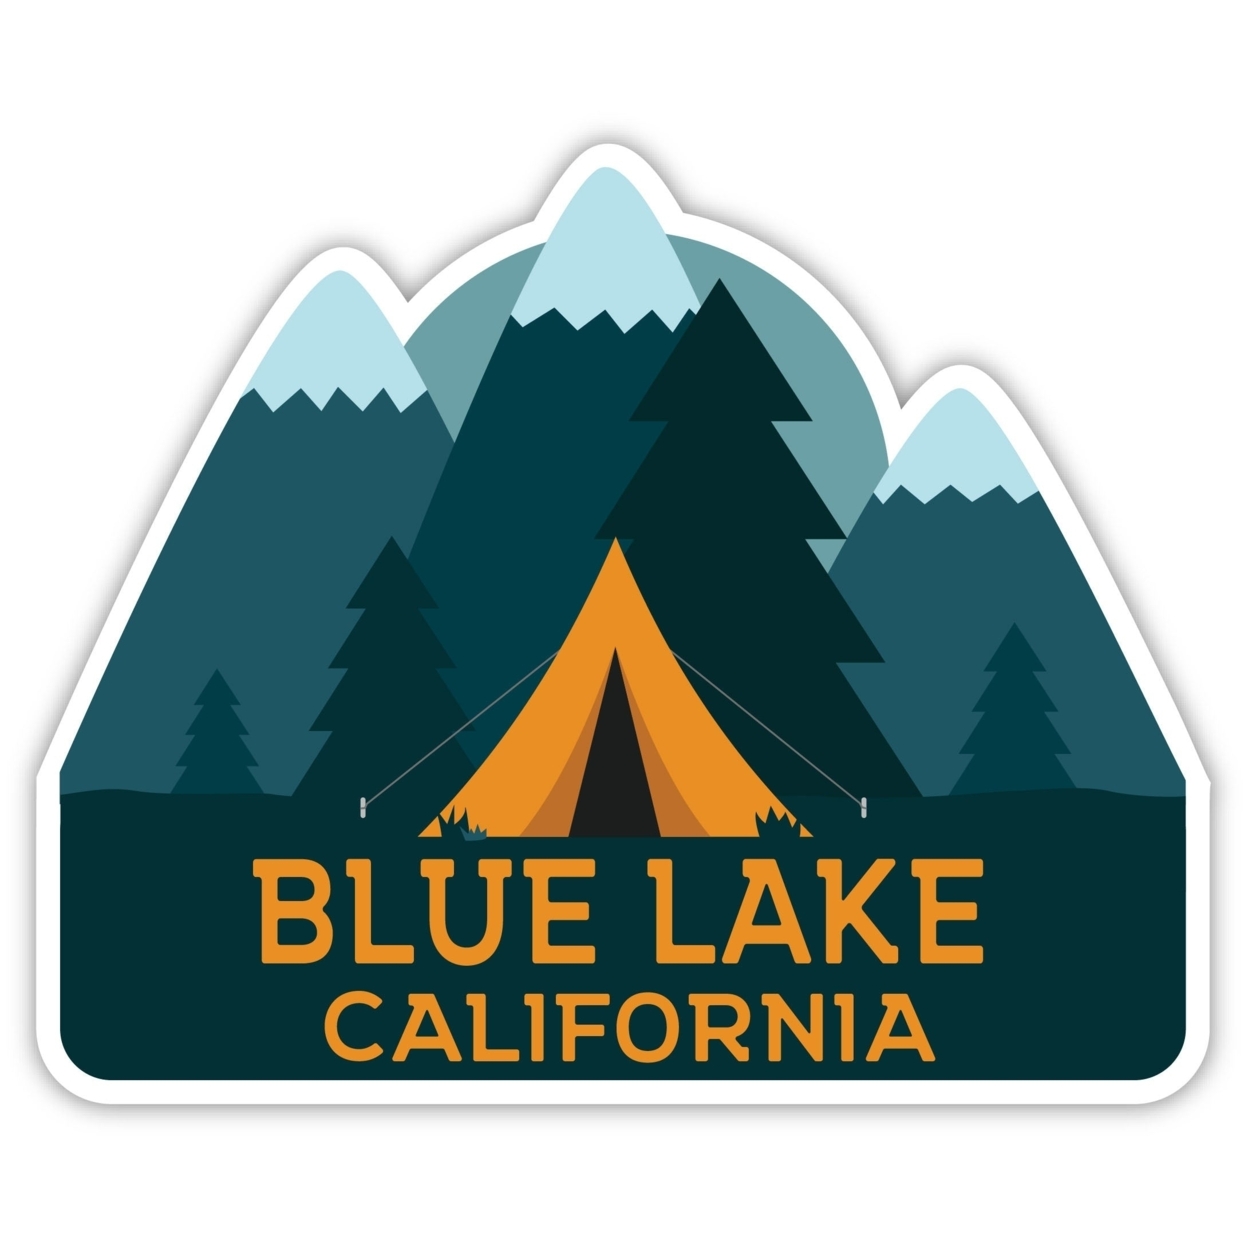 Blue Lake California Souvenir Decorative Stickers (Choose Theme And Size) - 4-Pack, 2-Inch, Tent